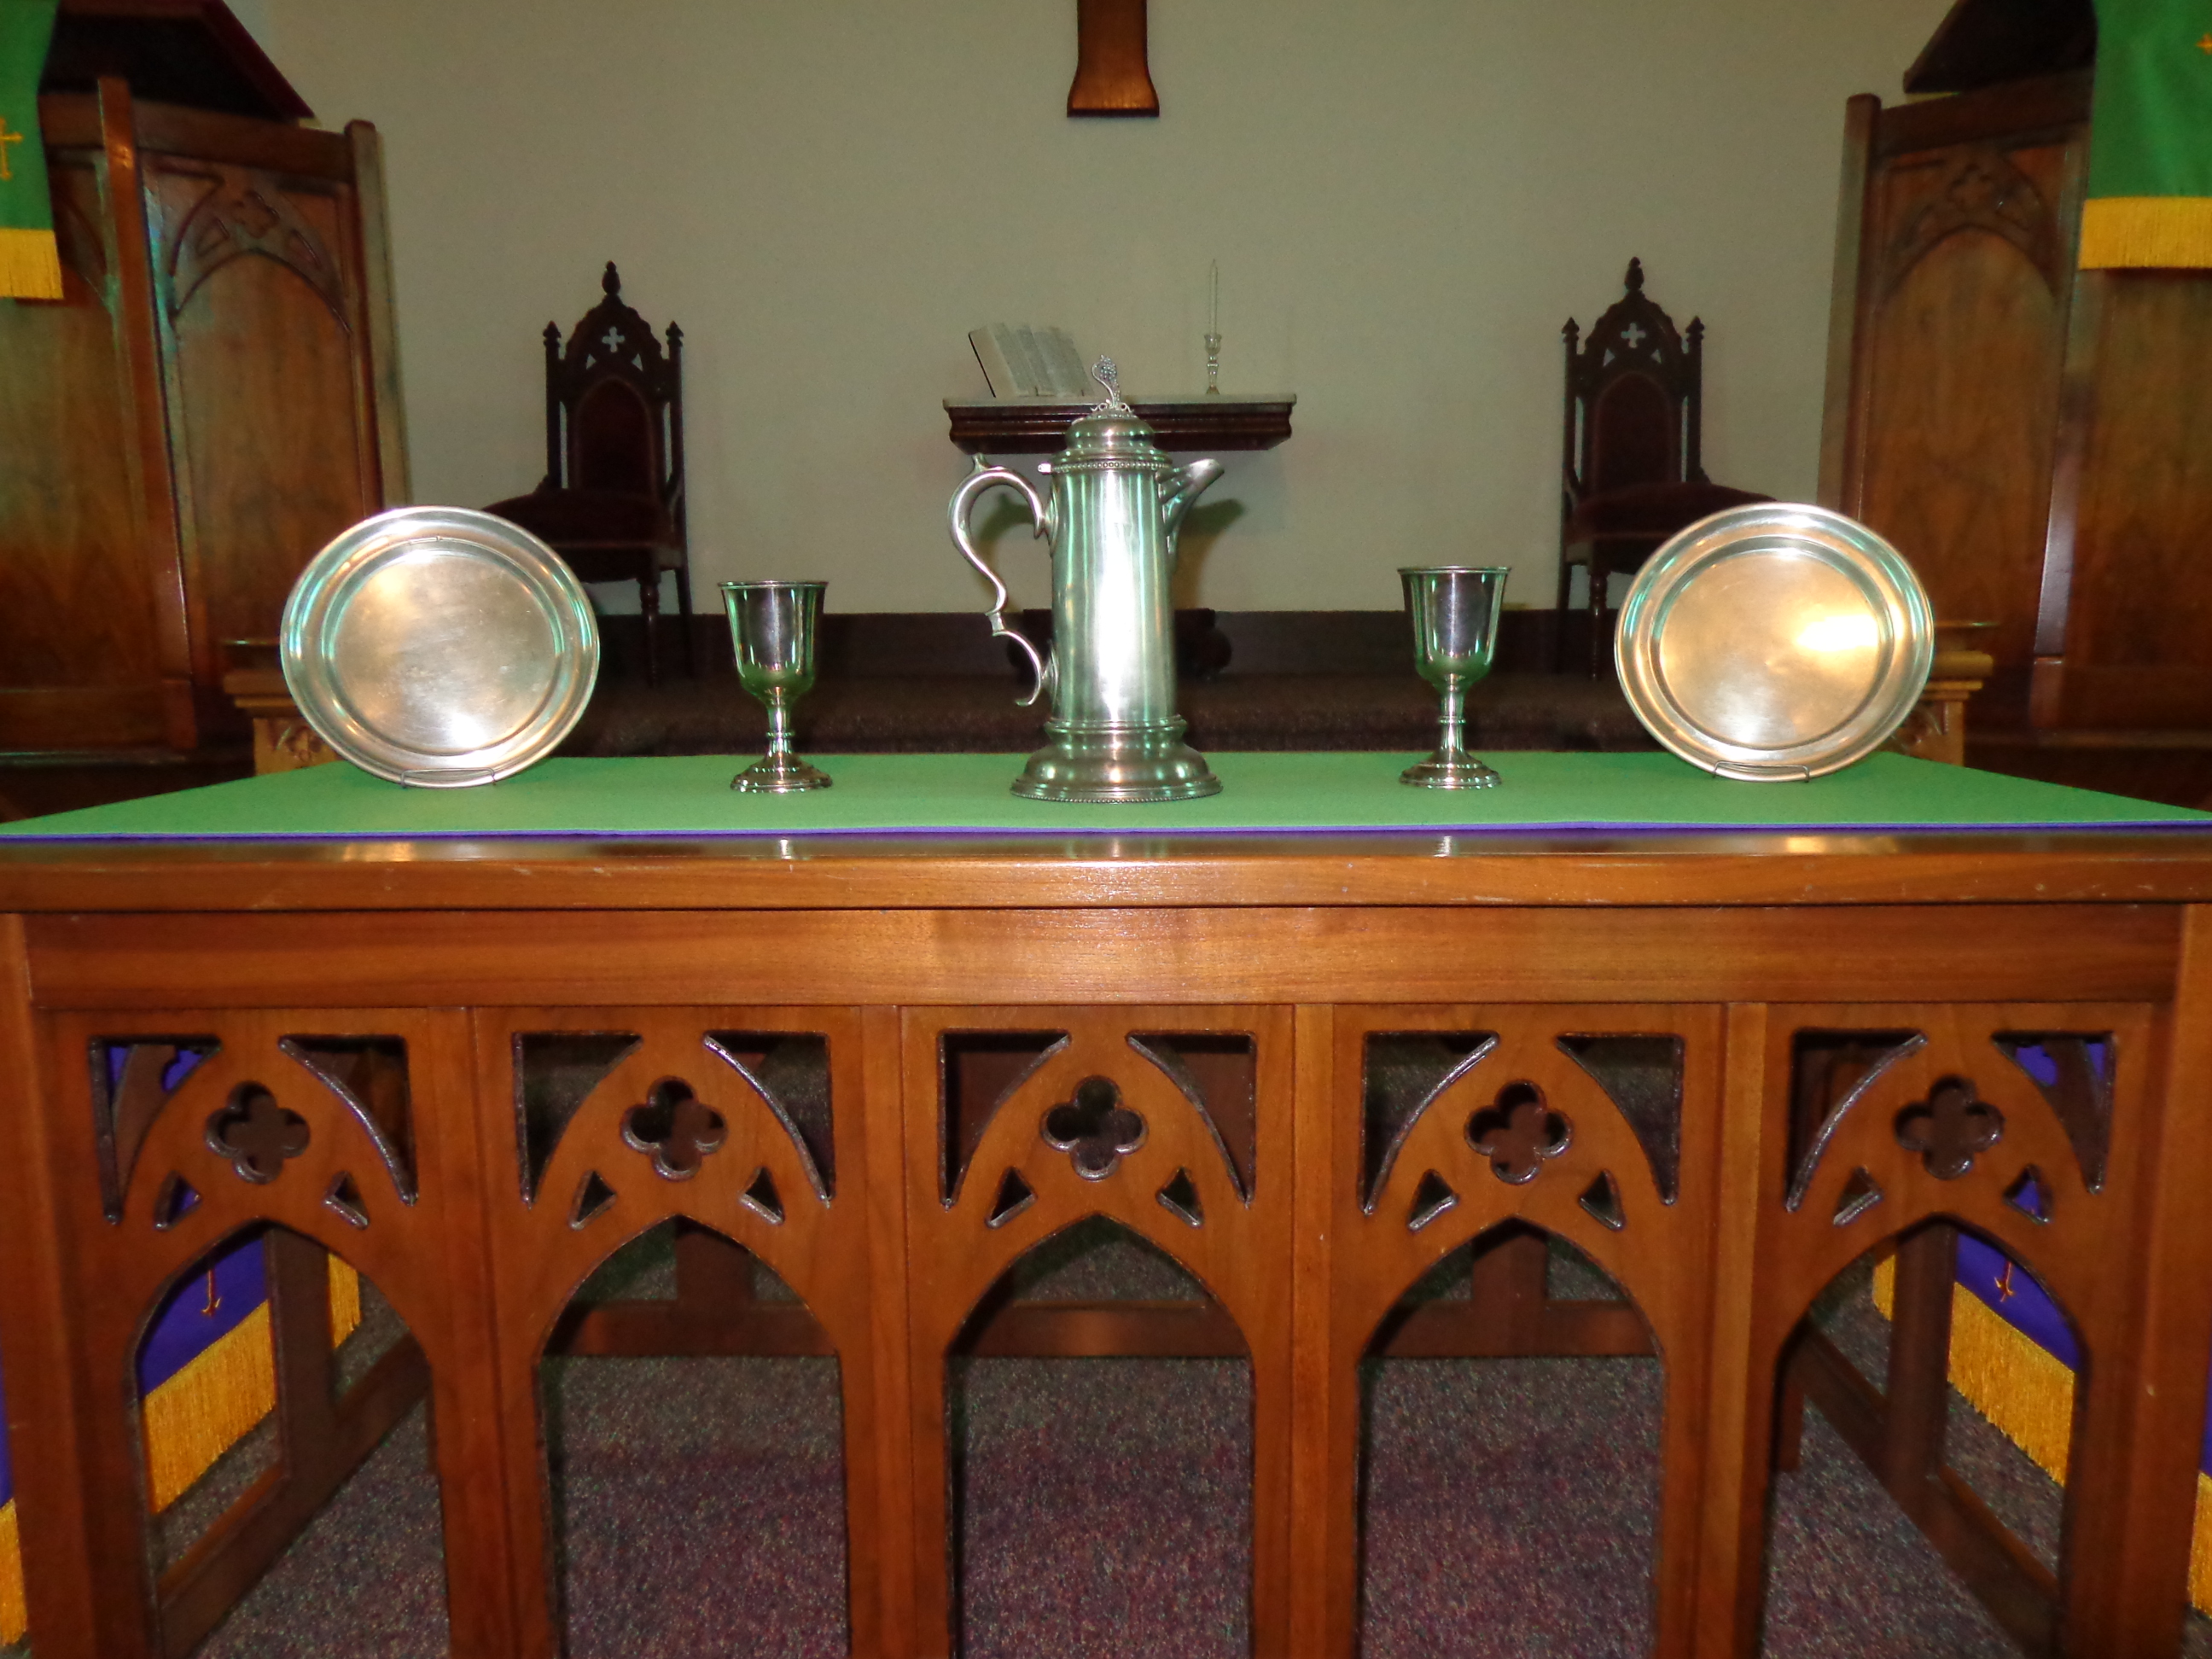 Table with Communion items